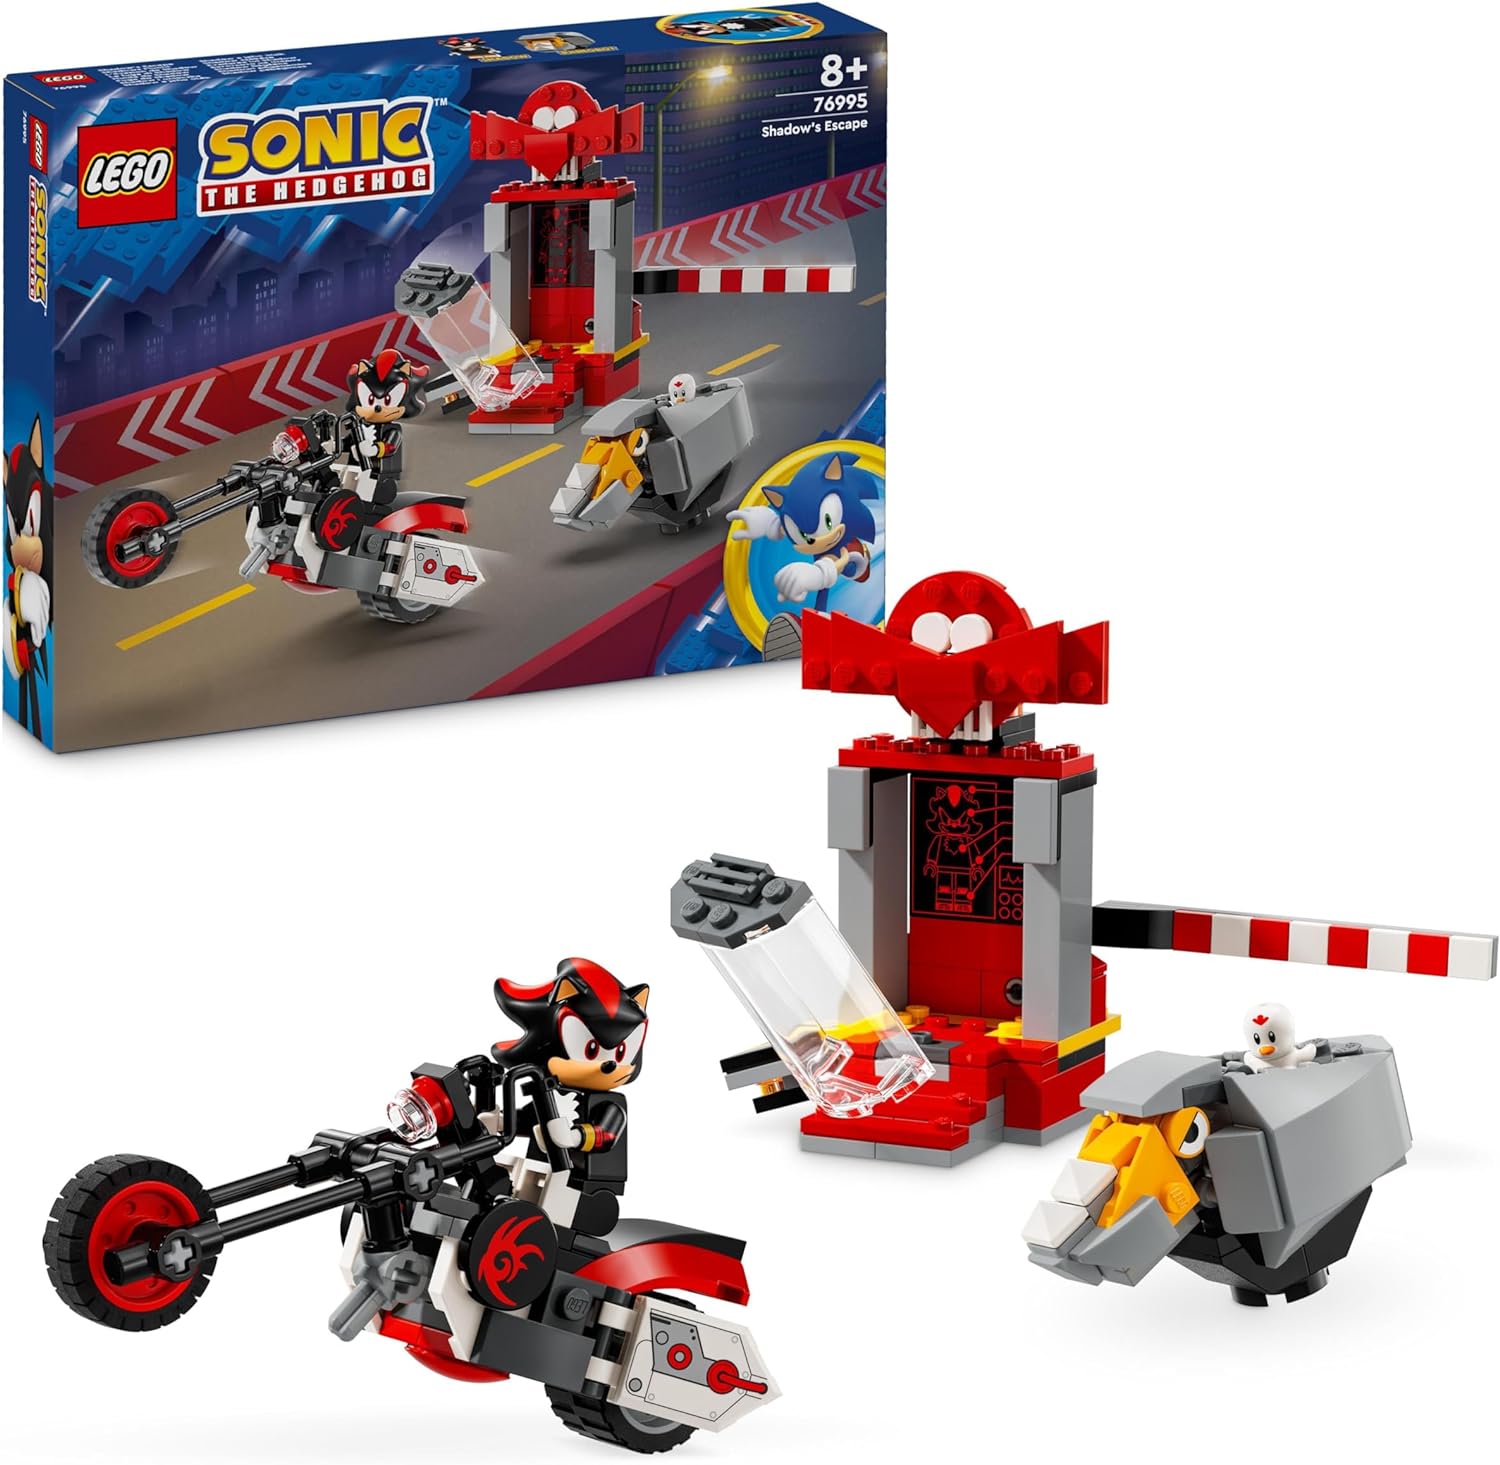 LEGO Sonic The Hedgehog Shadow The Hedgehog Escape Set with Motorcycle Toy and Video Game Figures, Gift for Gamers and Fans from 8 Years, Fan Item for Boys and Girls 76995